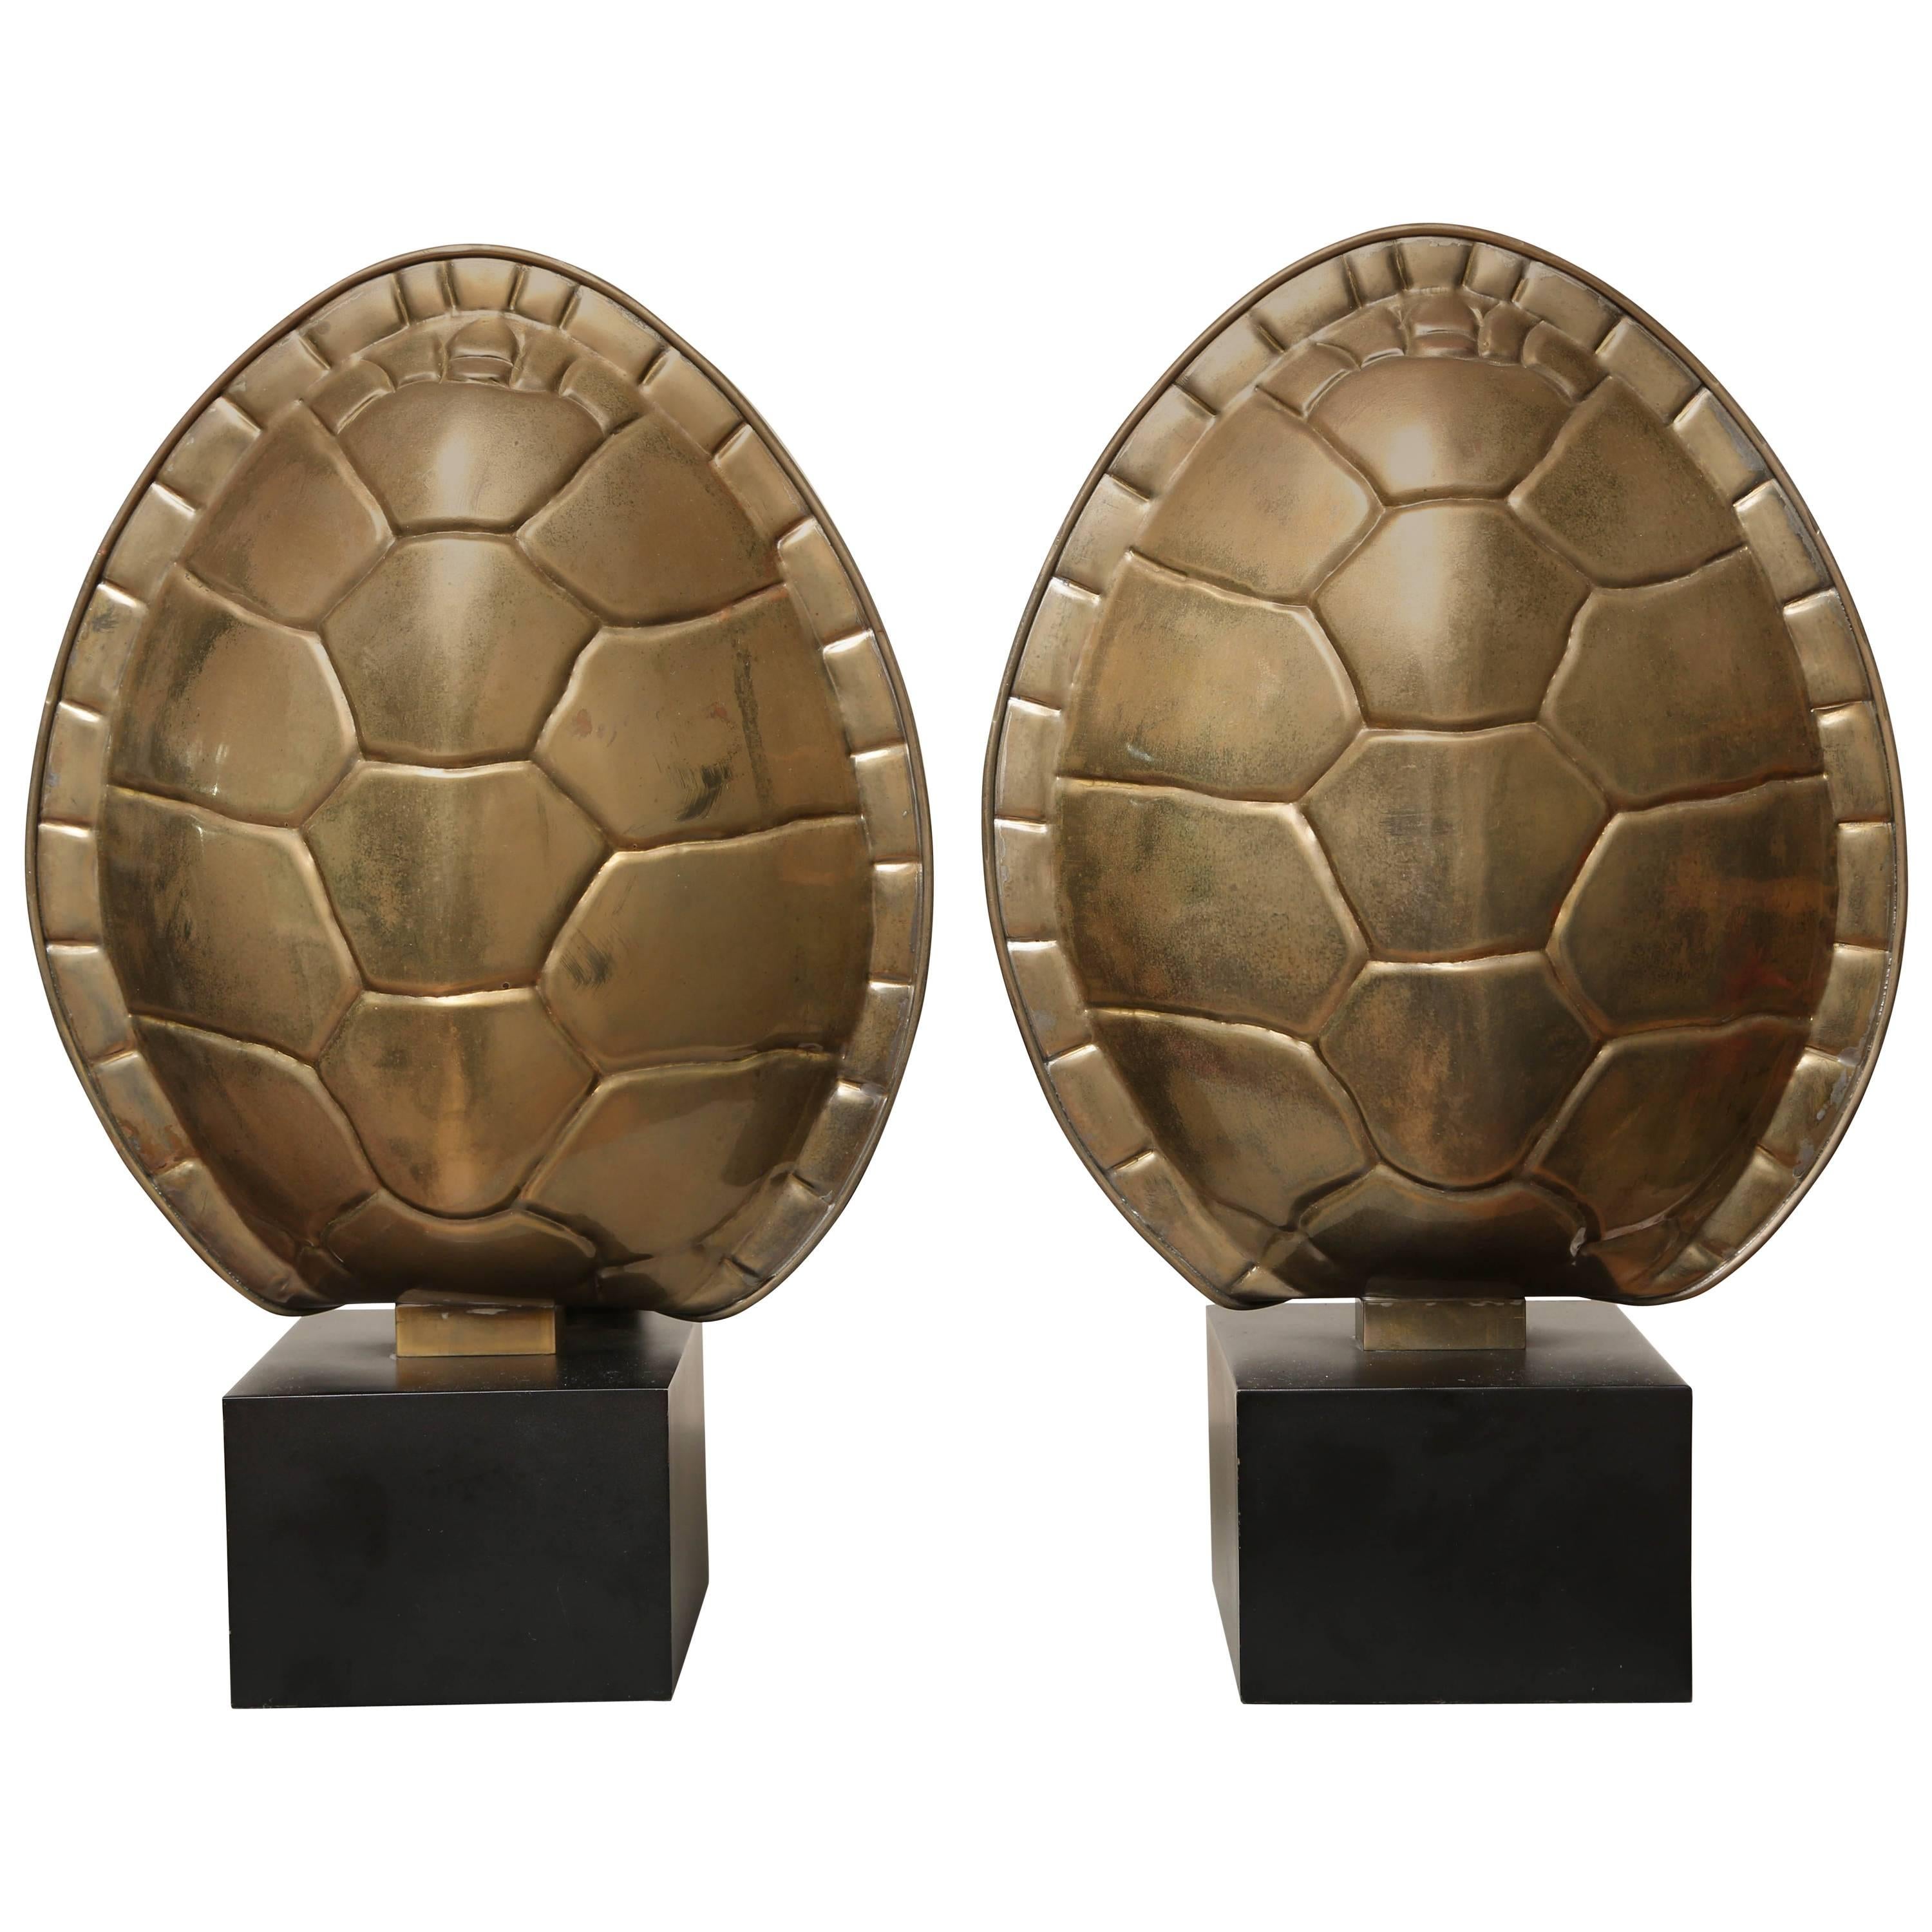 Pair of Vintage Brass Tortoise Shell Lamps by Chapman